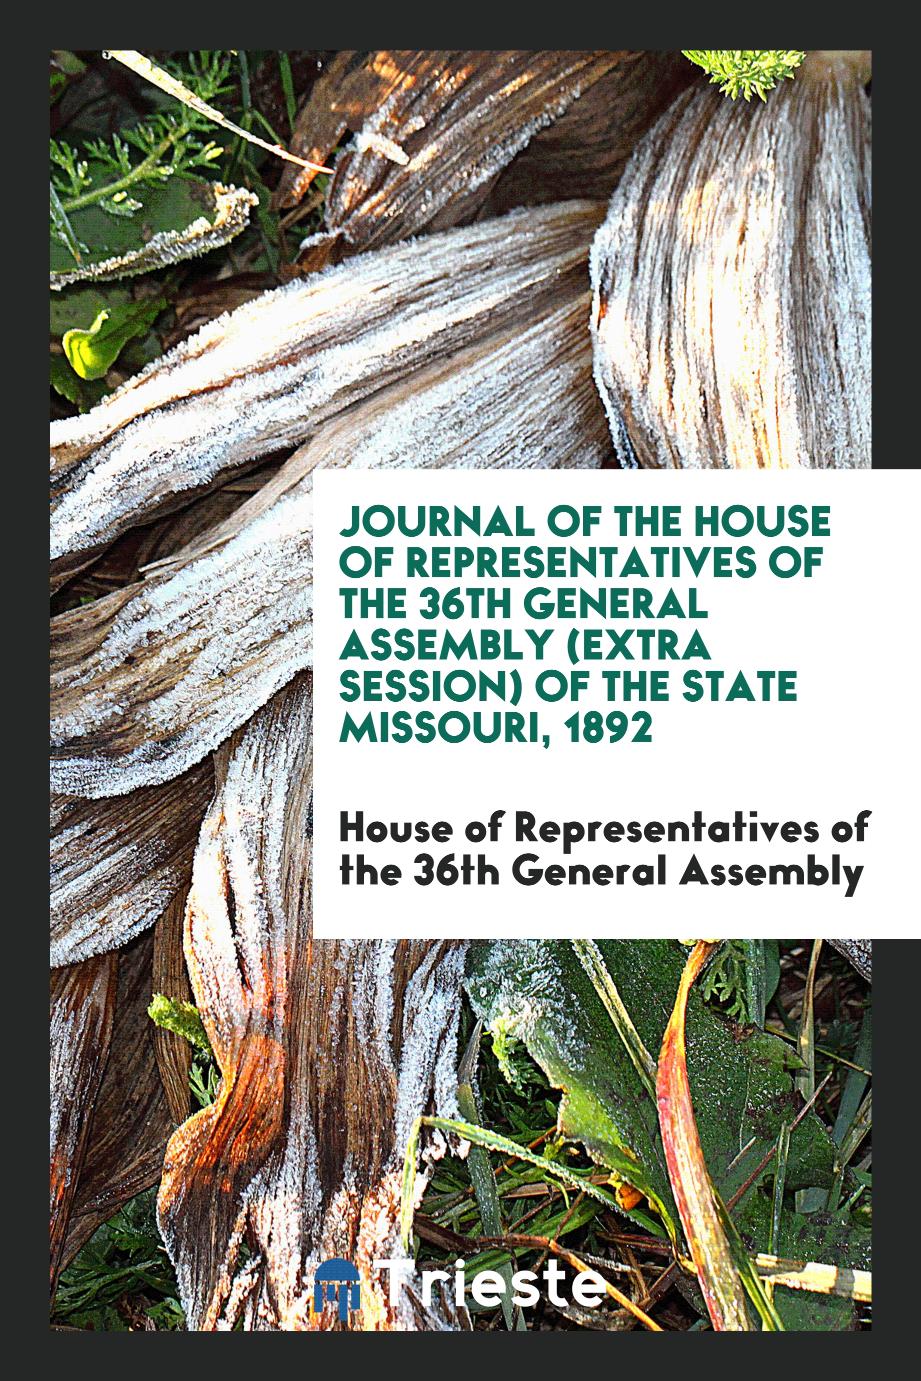 Journal of the House of Representatives of the 36th General Assembly (Extra Session) of the State Missouri, 1892